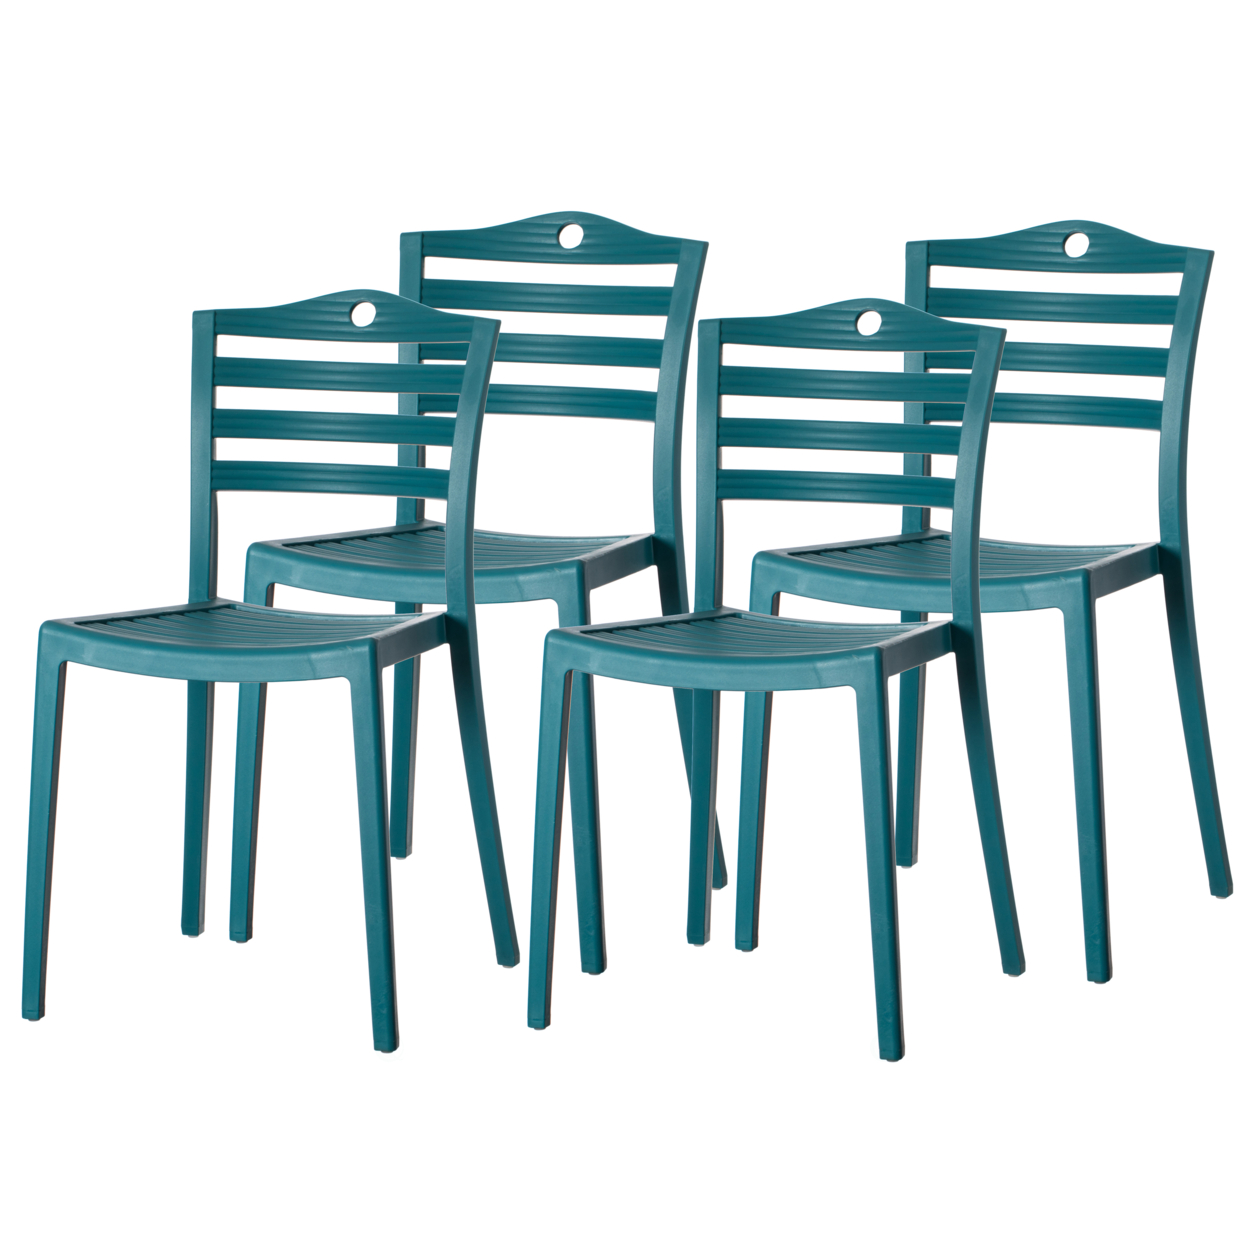 Stackable Modern Plastic Indoor And Outdoor Dining Chair With Ladderback Design For All Weather Use - Set Of 4 Blue